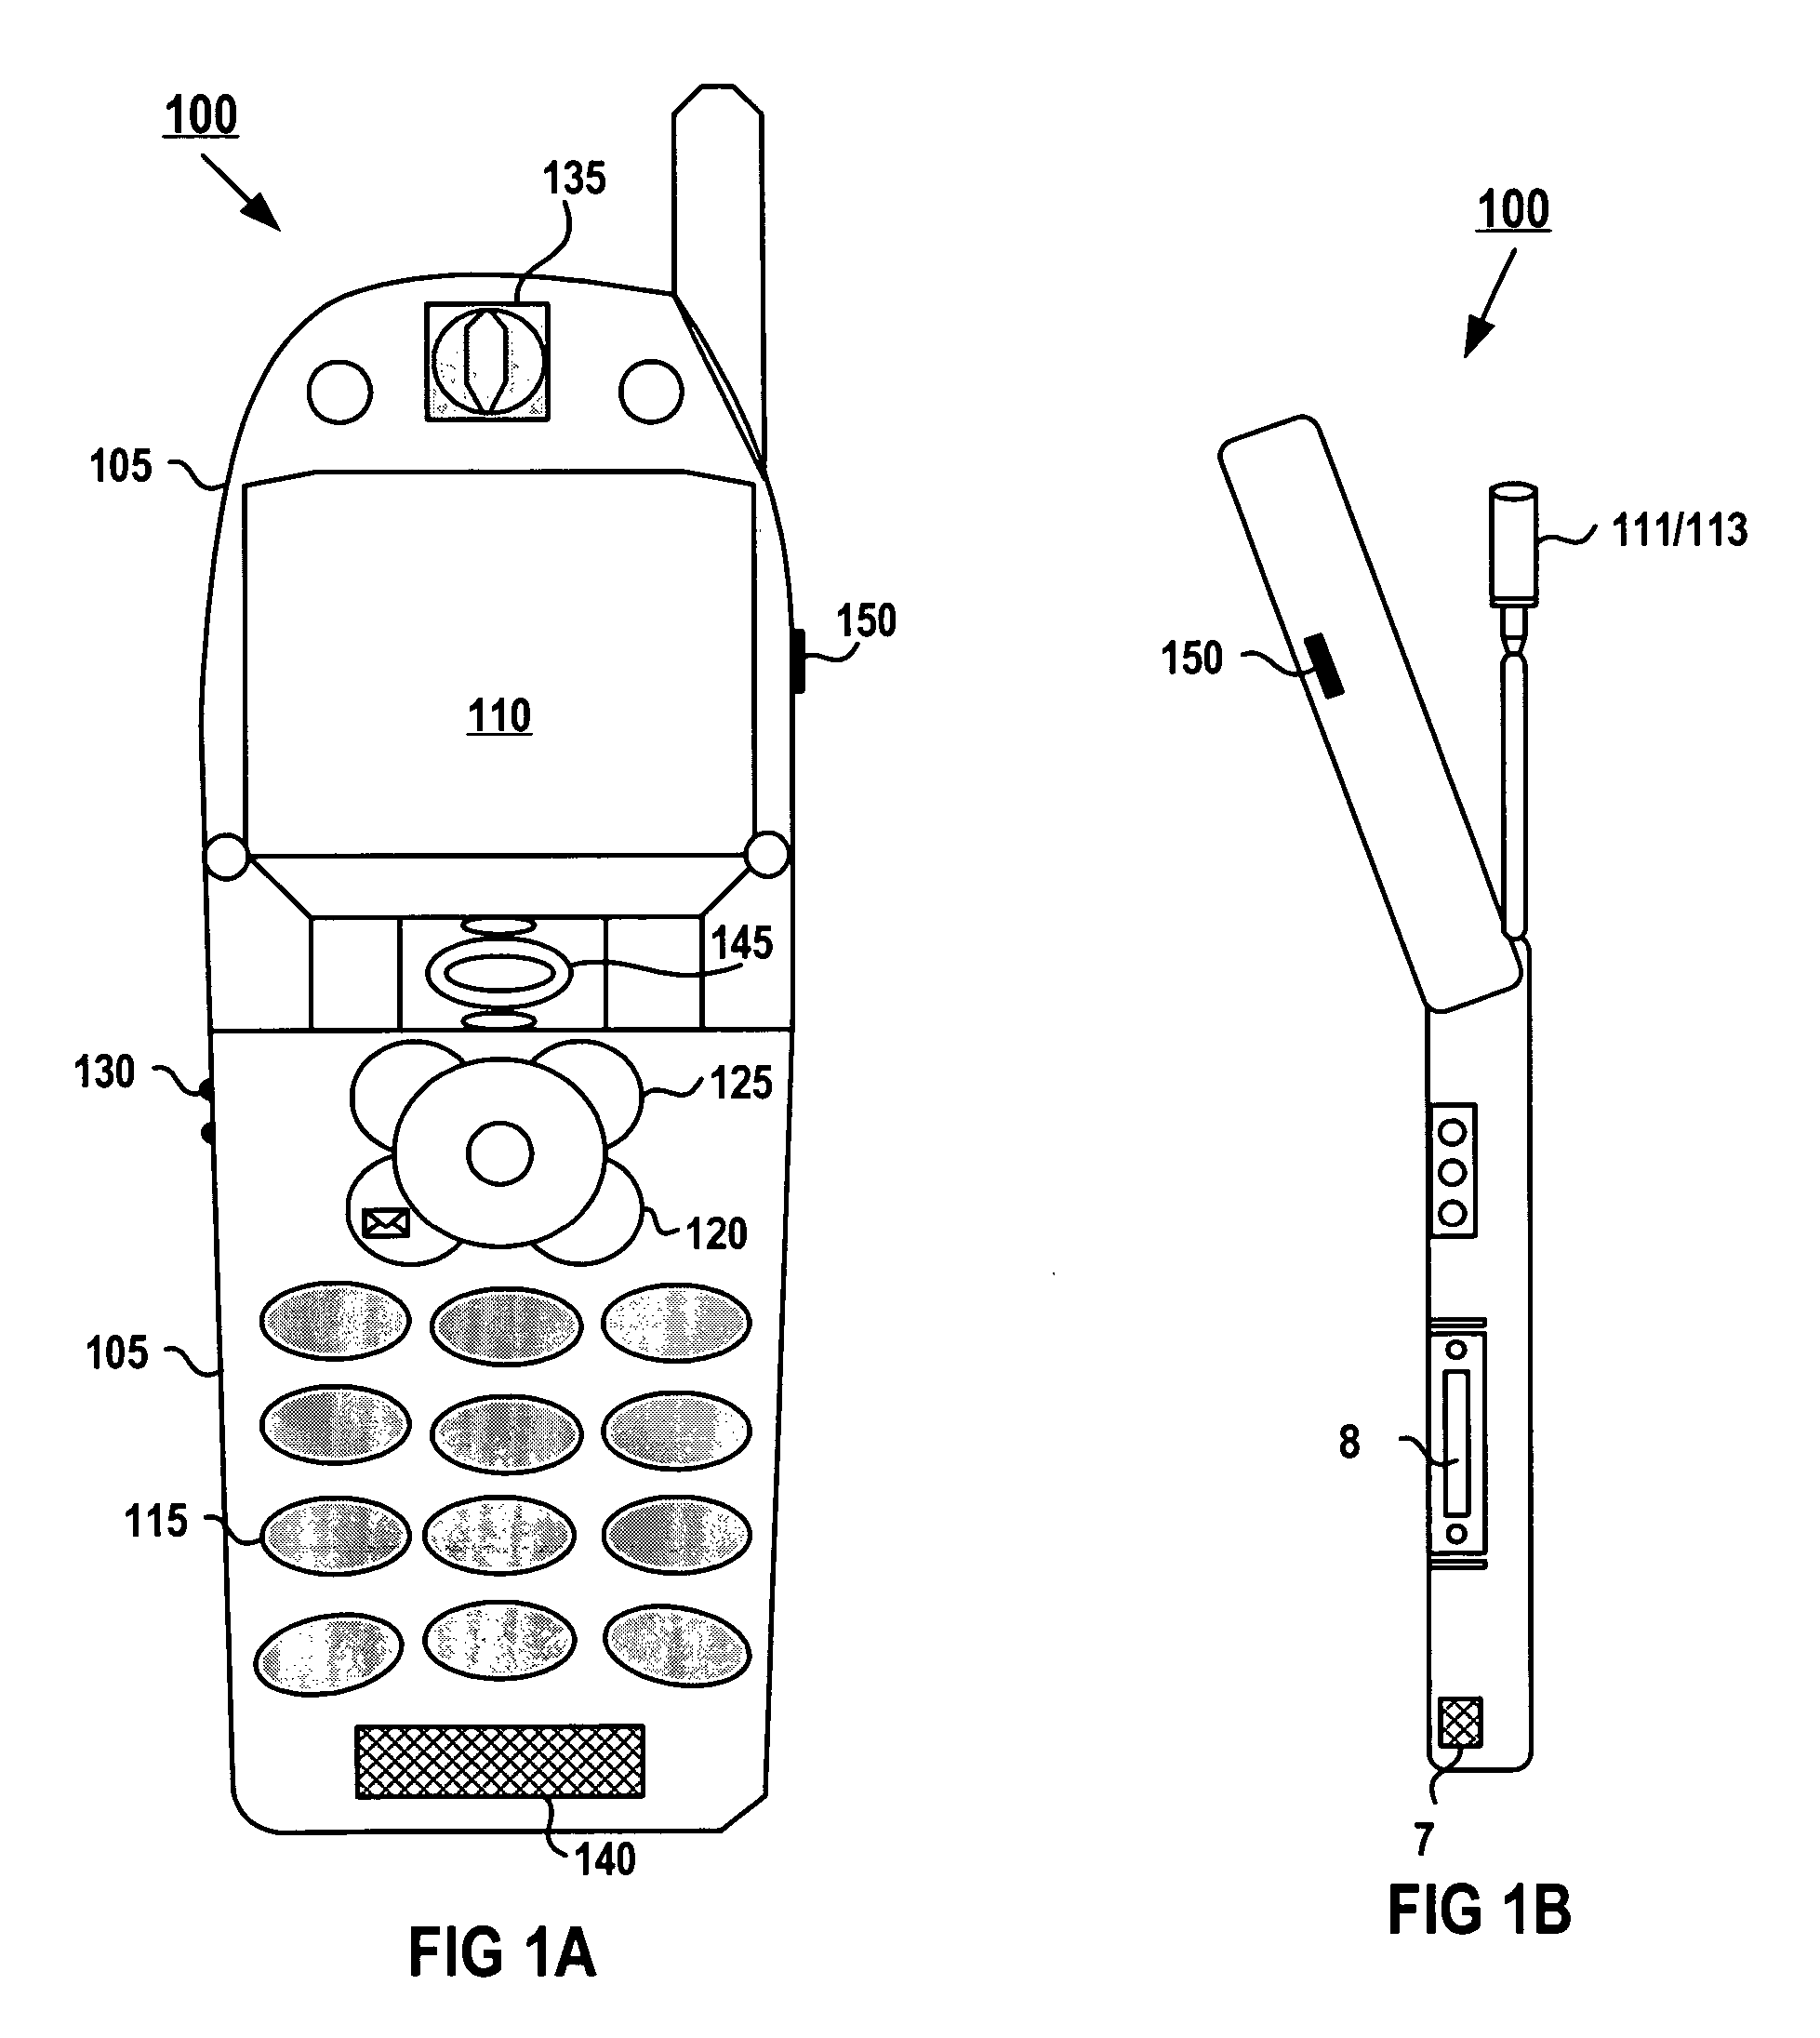 Single wireless communication device with multiple, concurrent subscriber number capability